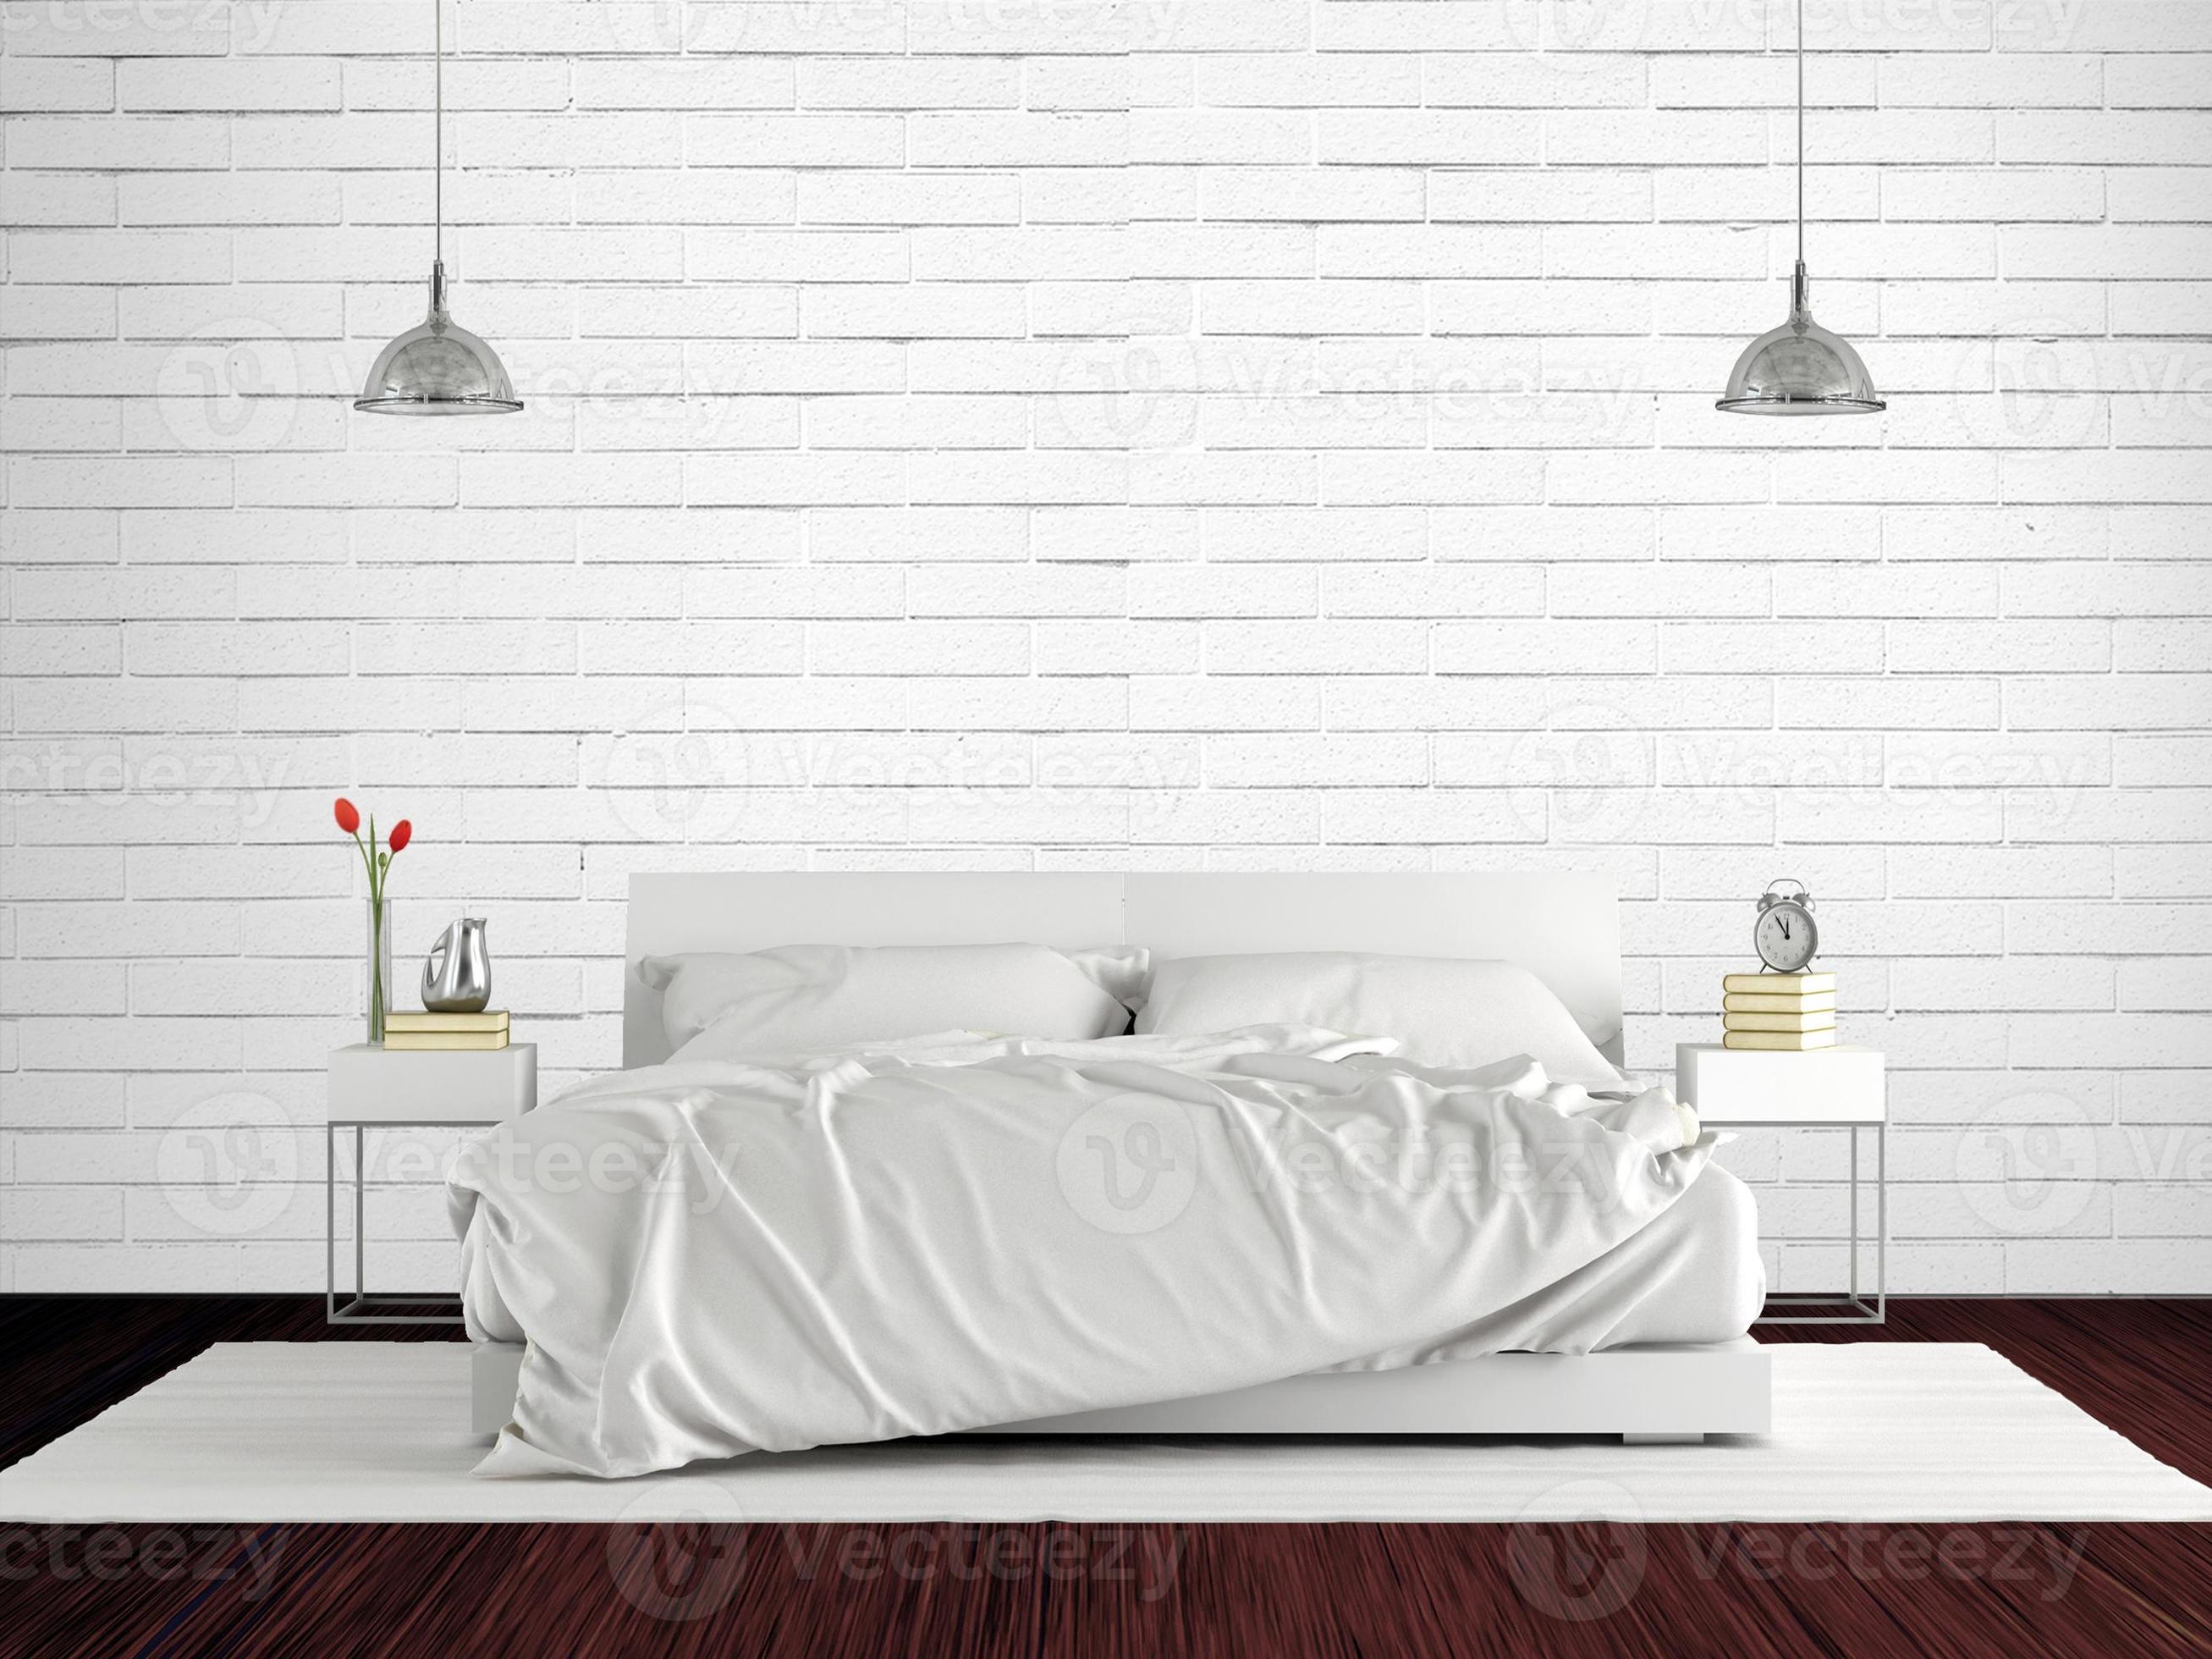 Minimalist master bedroom with double bed against white brick wall - 3d  rendering 7149375 Stock Photo at Vecteezy